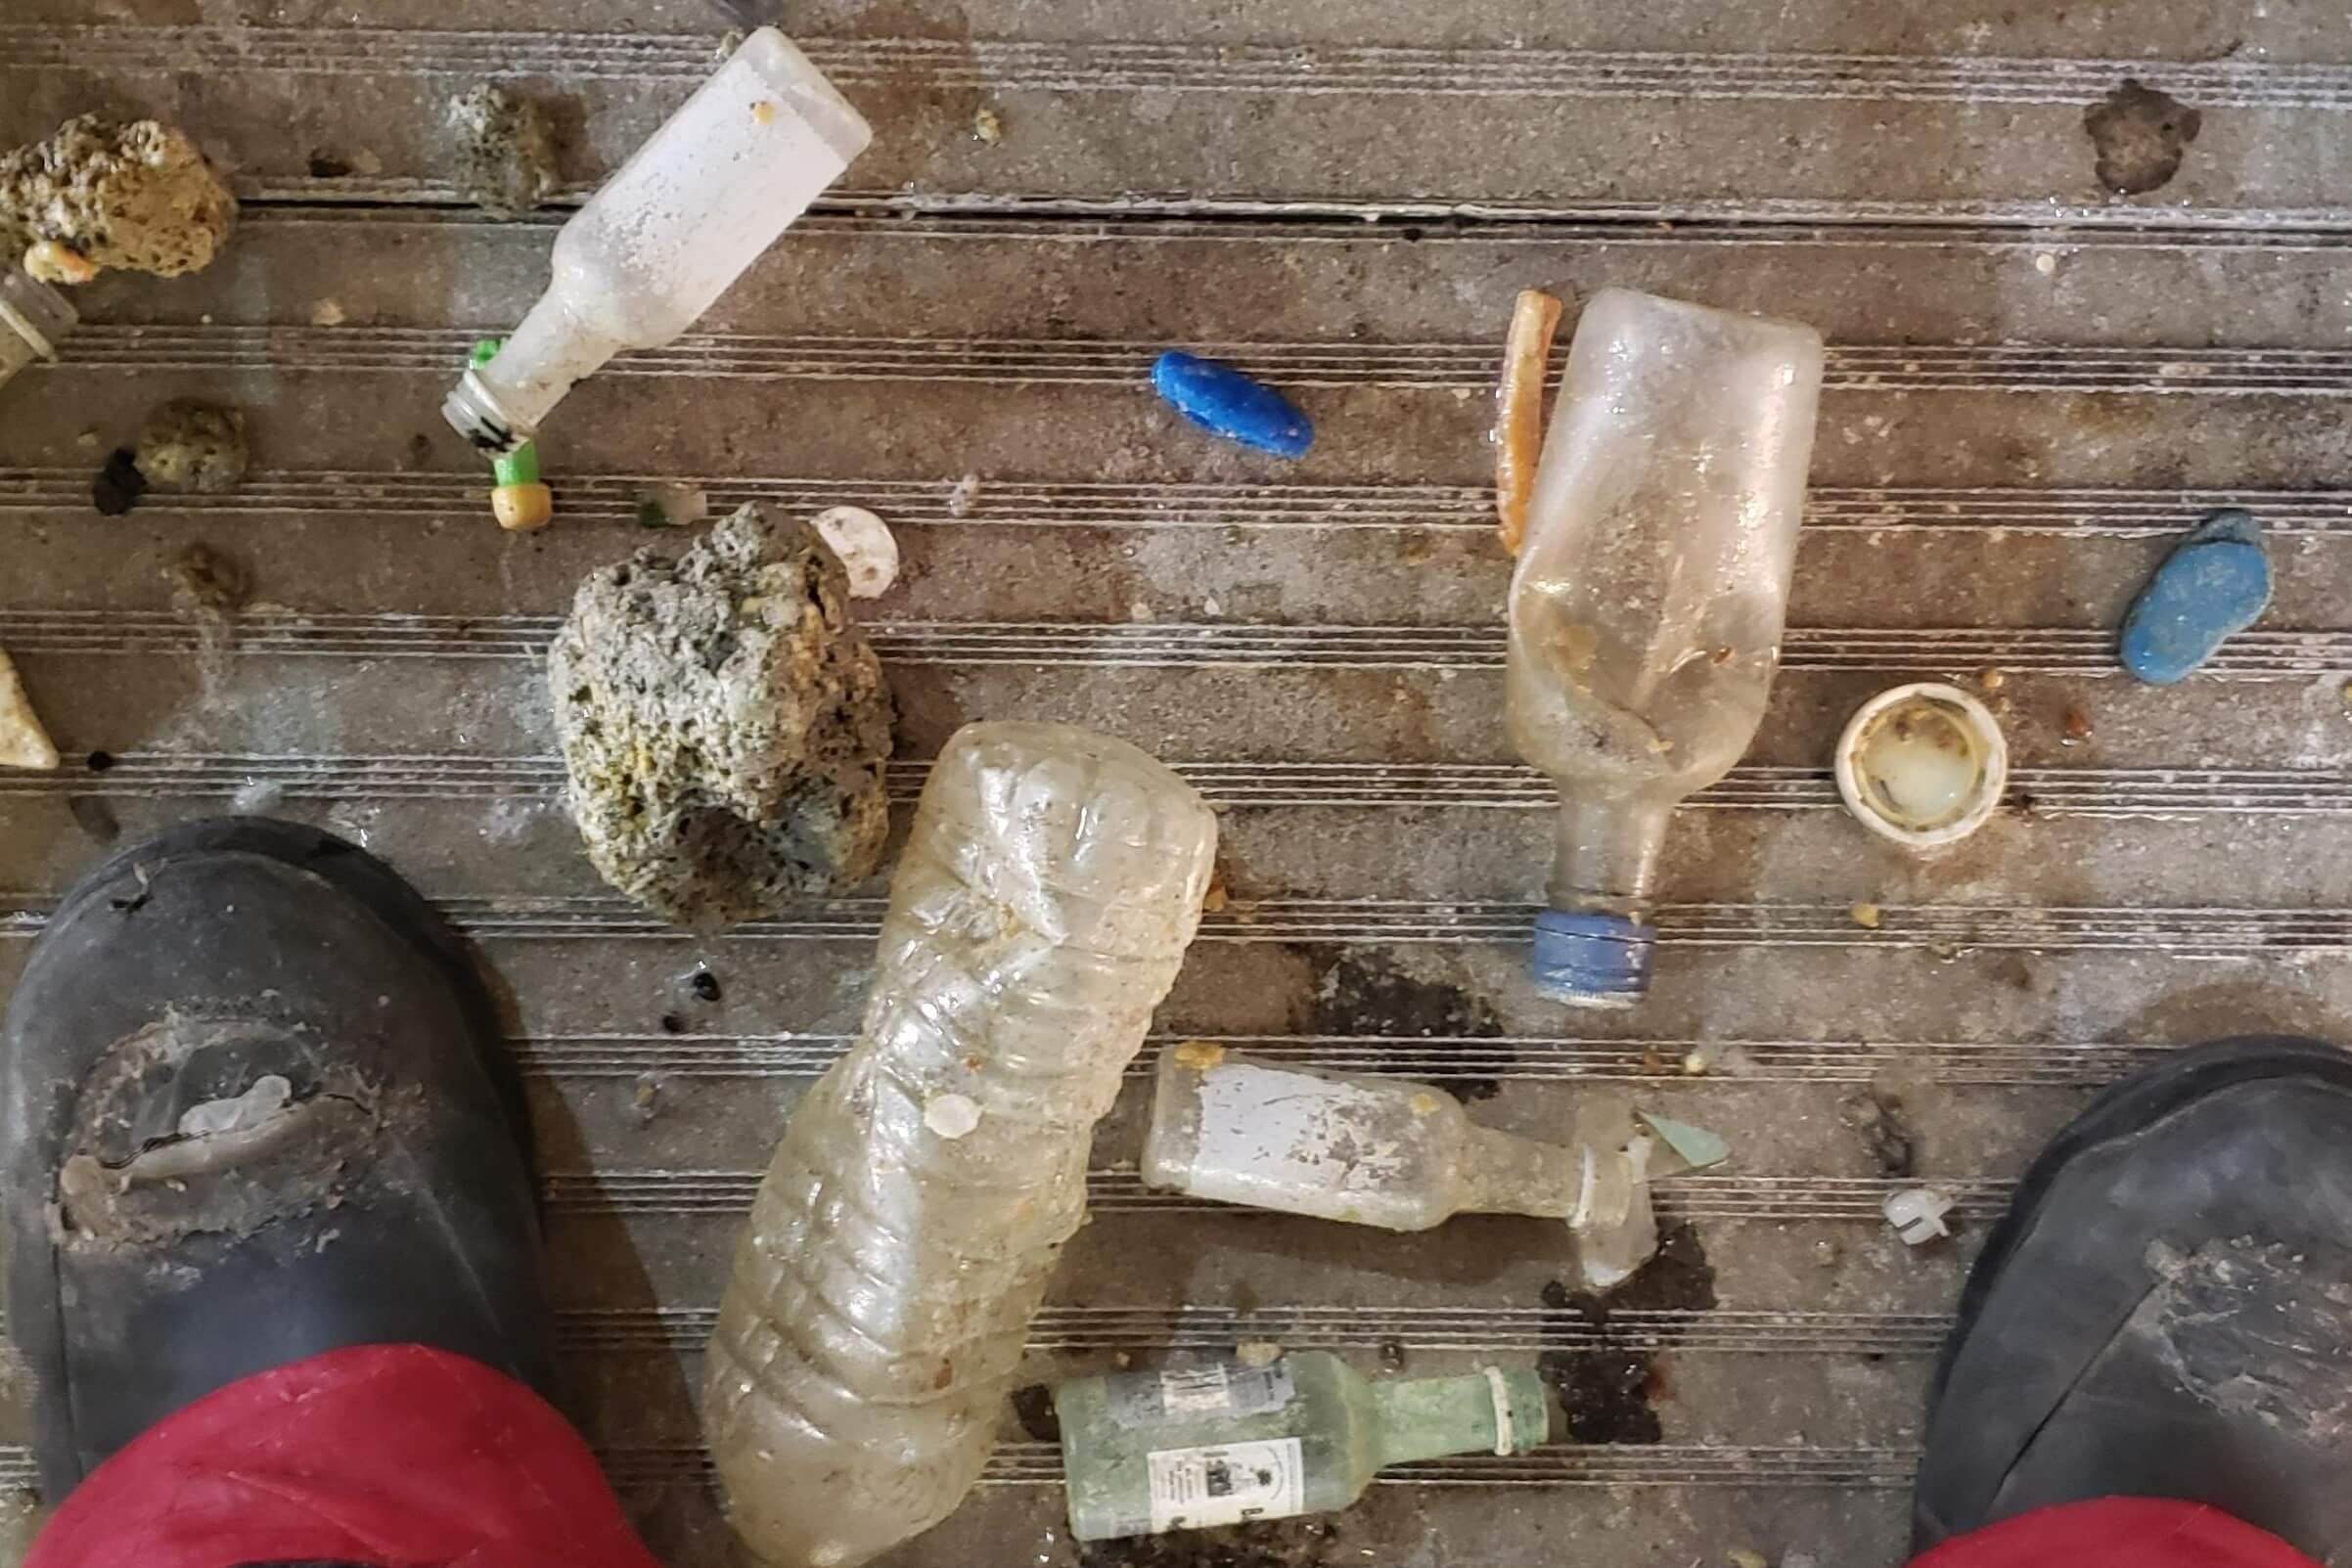 Bottles and garbage pulled from Headworks